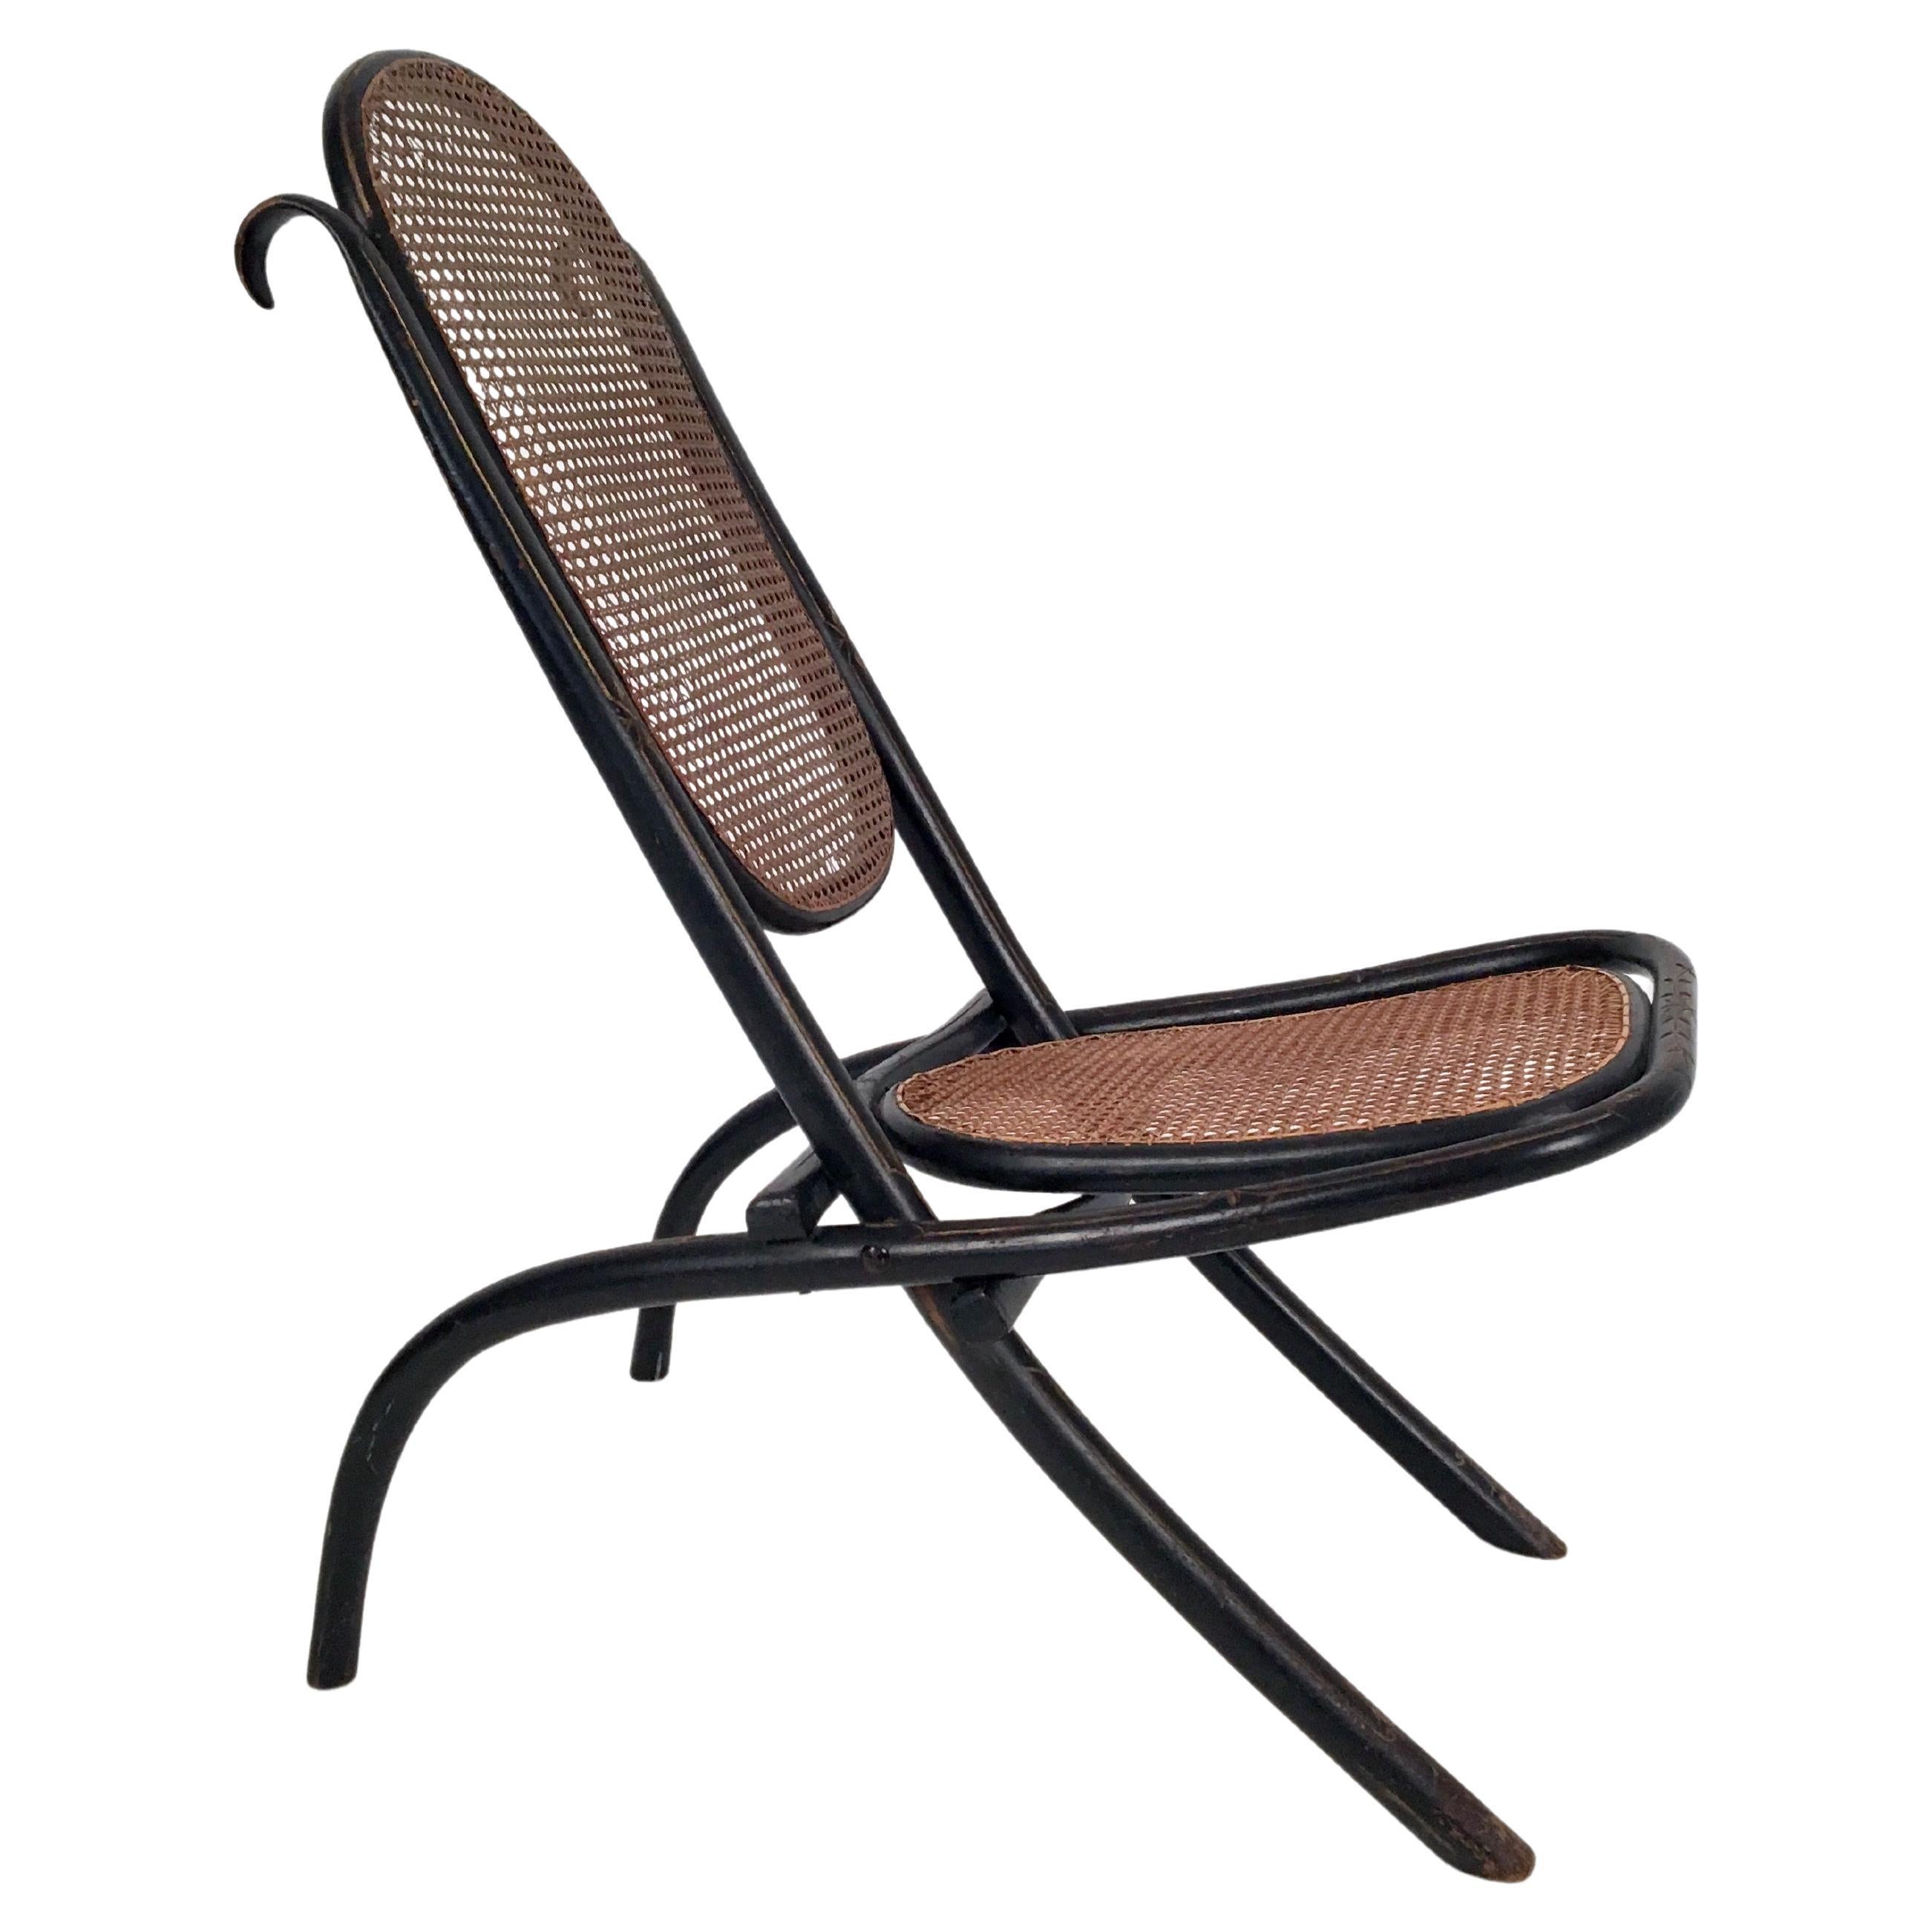 Bentwood and Cane Thonet "Caminsessel" / Fire Place Chair No. 1, c. 1860 For Sale